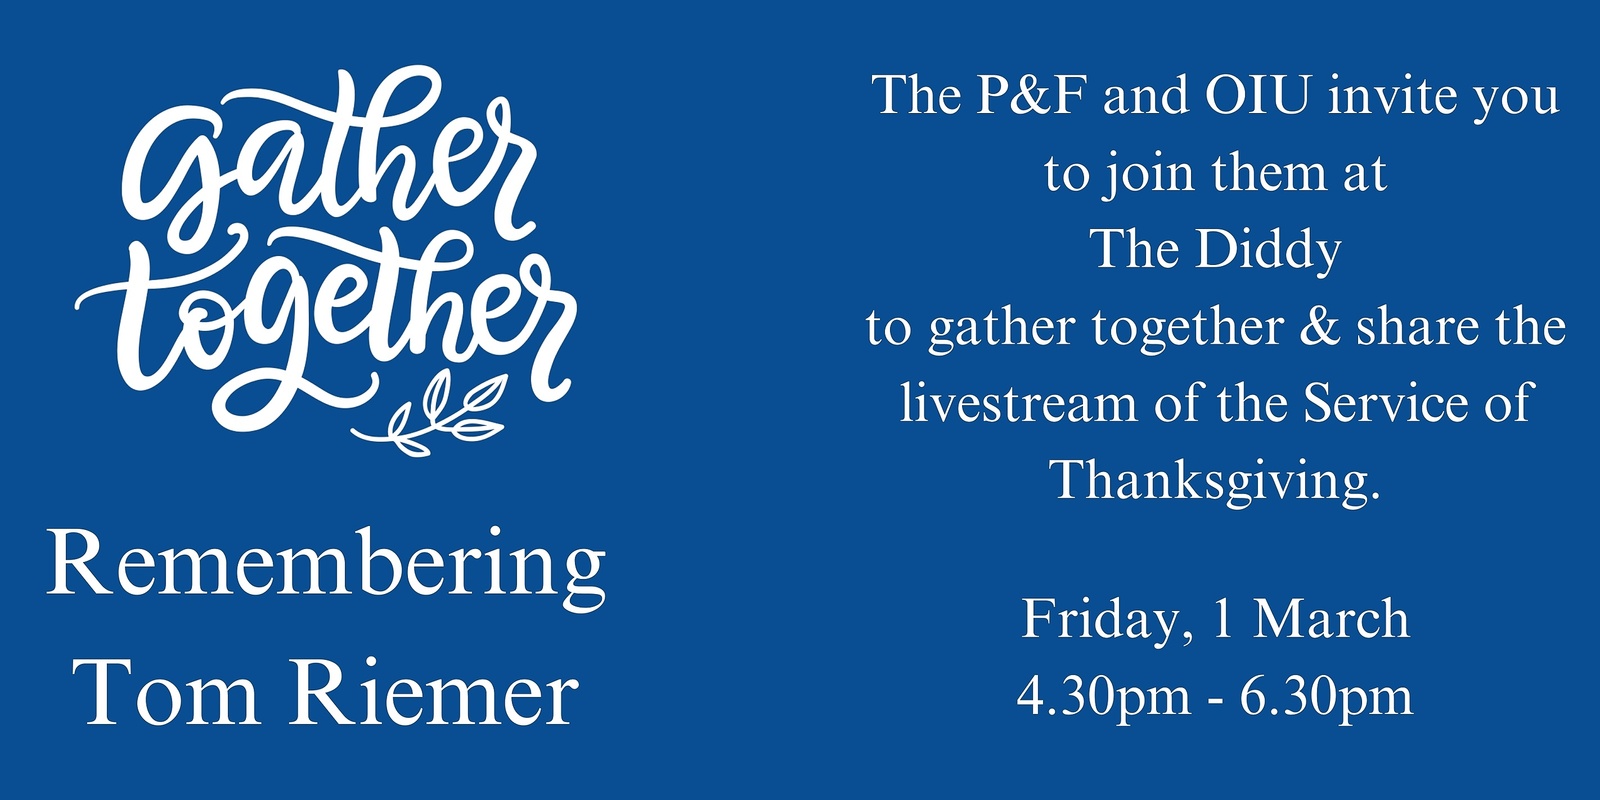 Banner image for P&F and OIU livestream of the Service of Thanksgiving at The Diddy